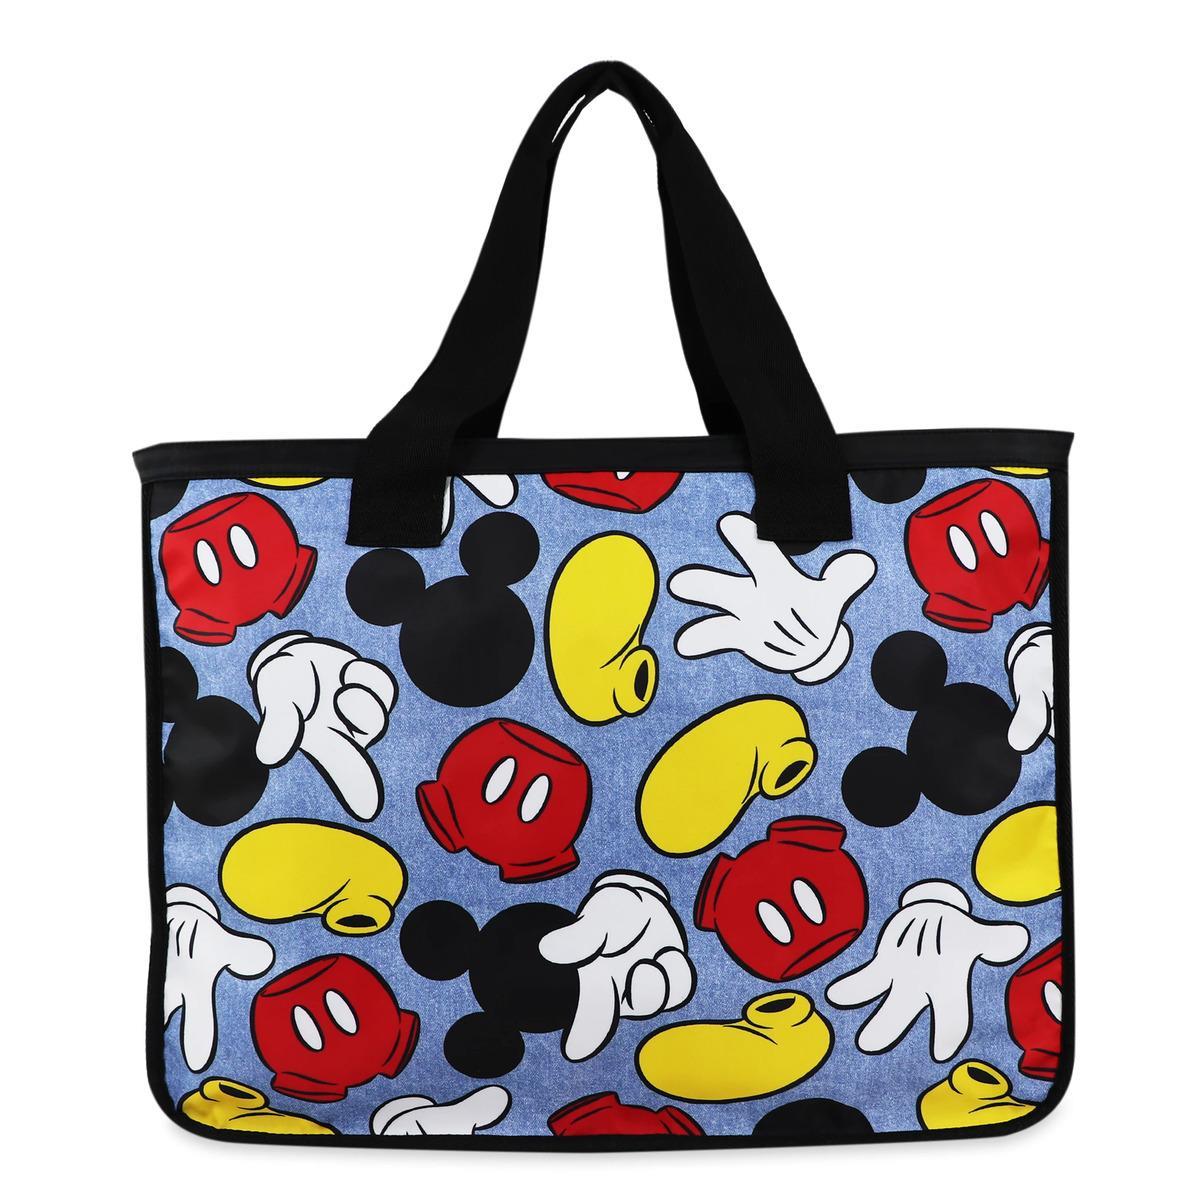 Disney Mickey Mouse All-over Print Tote Bag by Loungefly